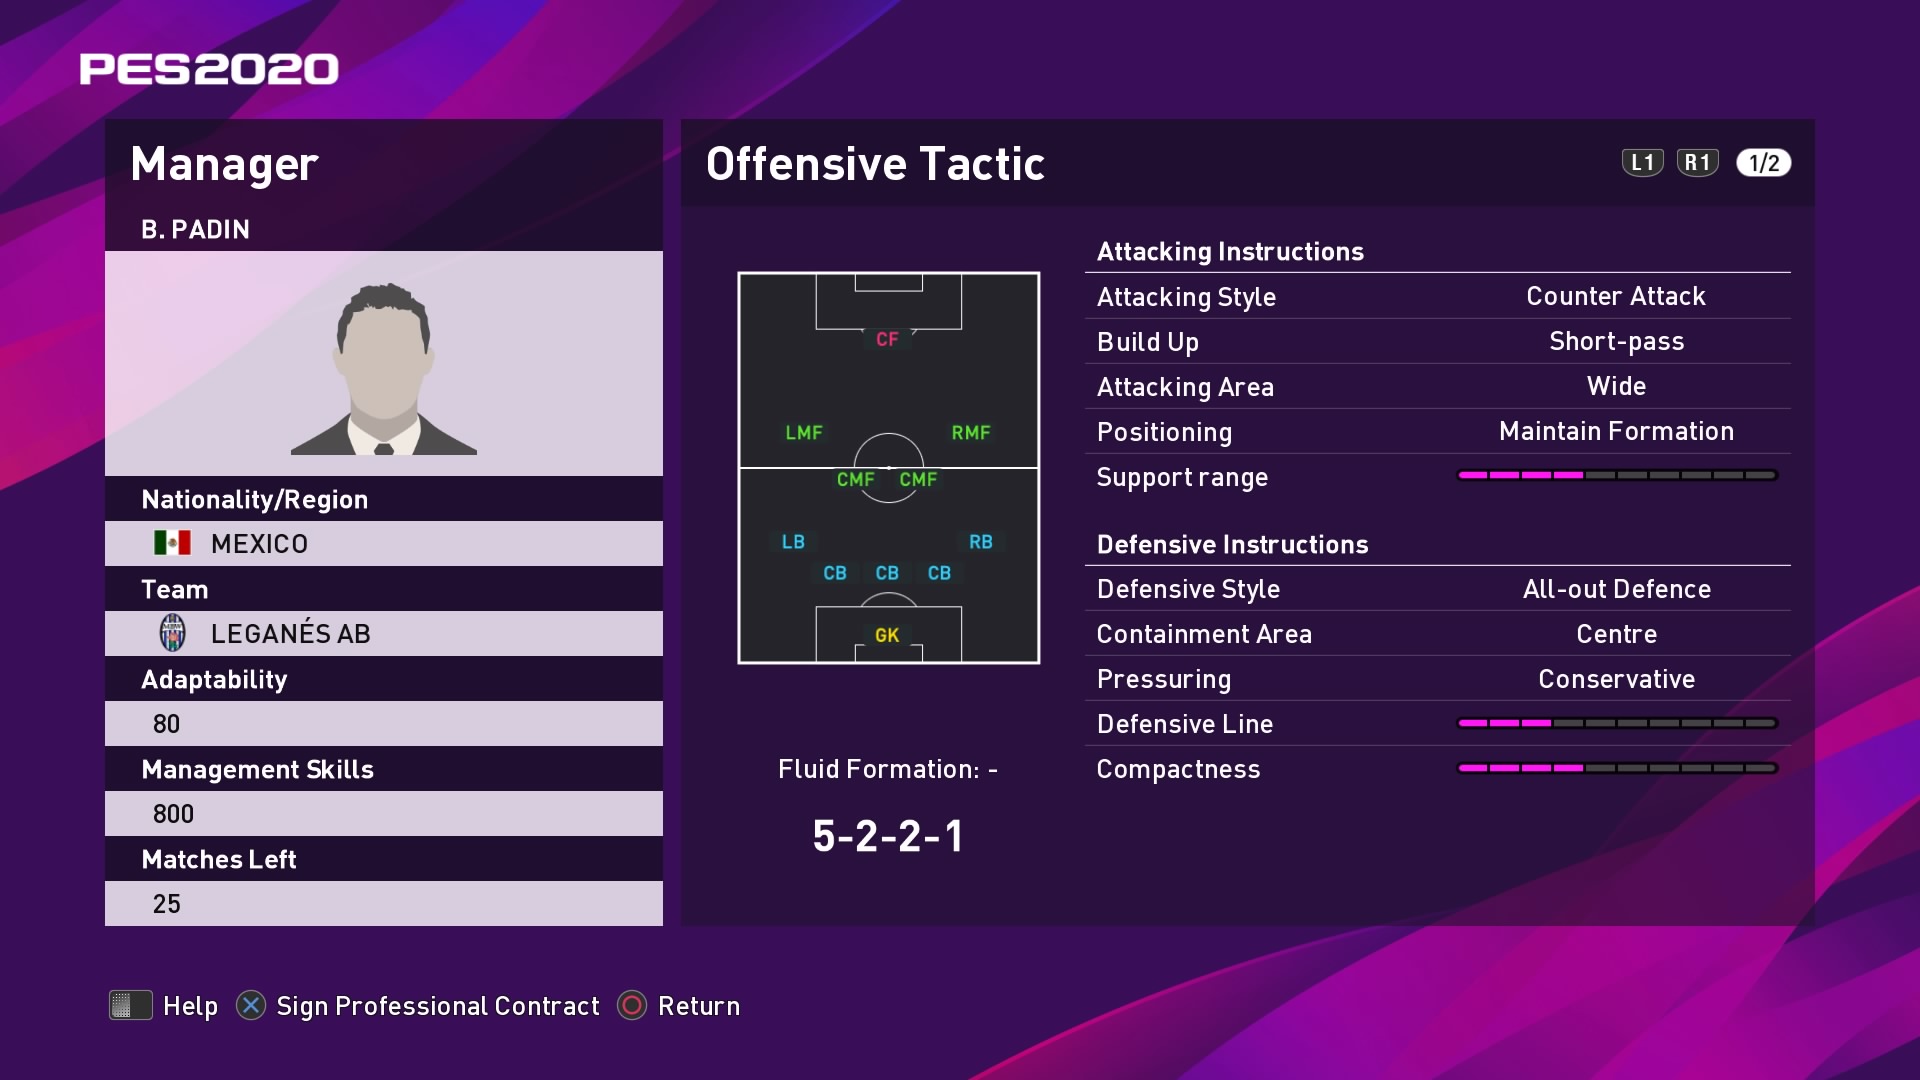 B. Padin (Javier Aguirre) Offensive Tactic in PES 2020 myClub